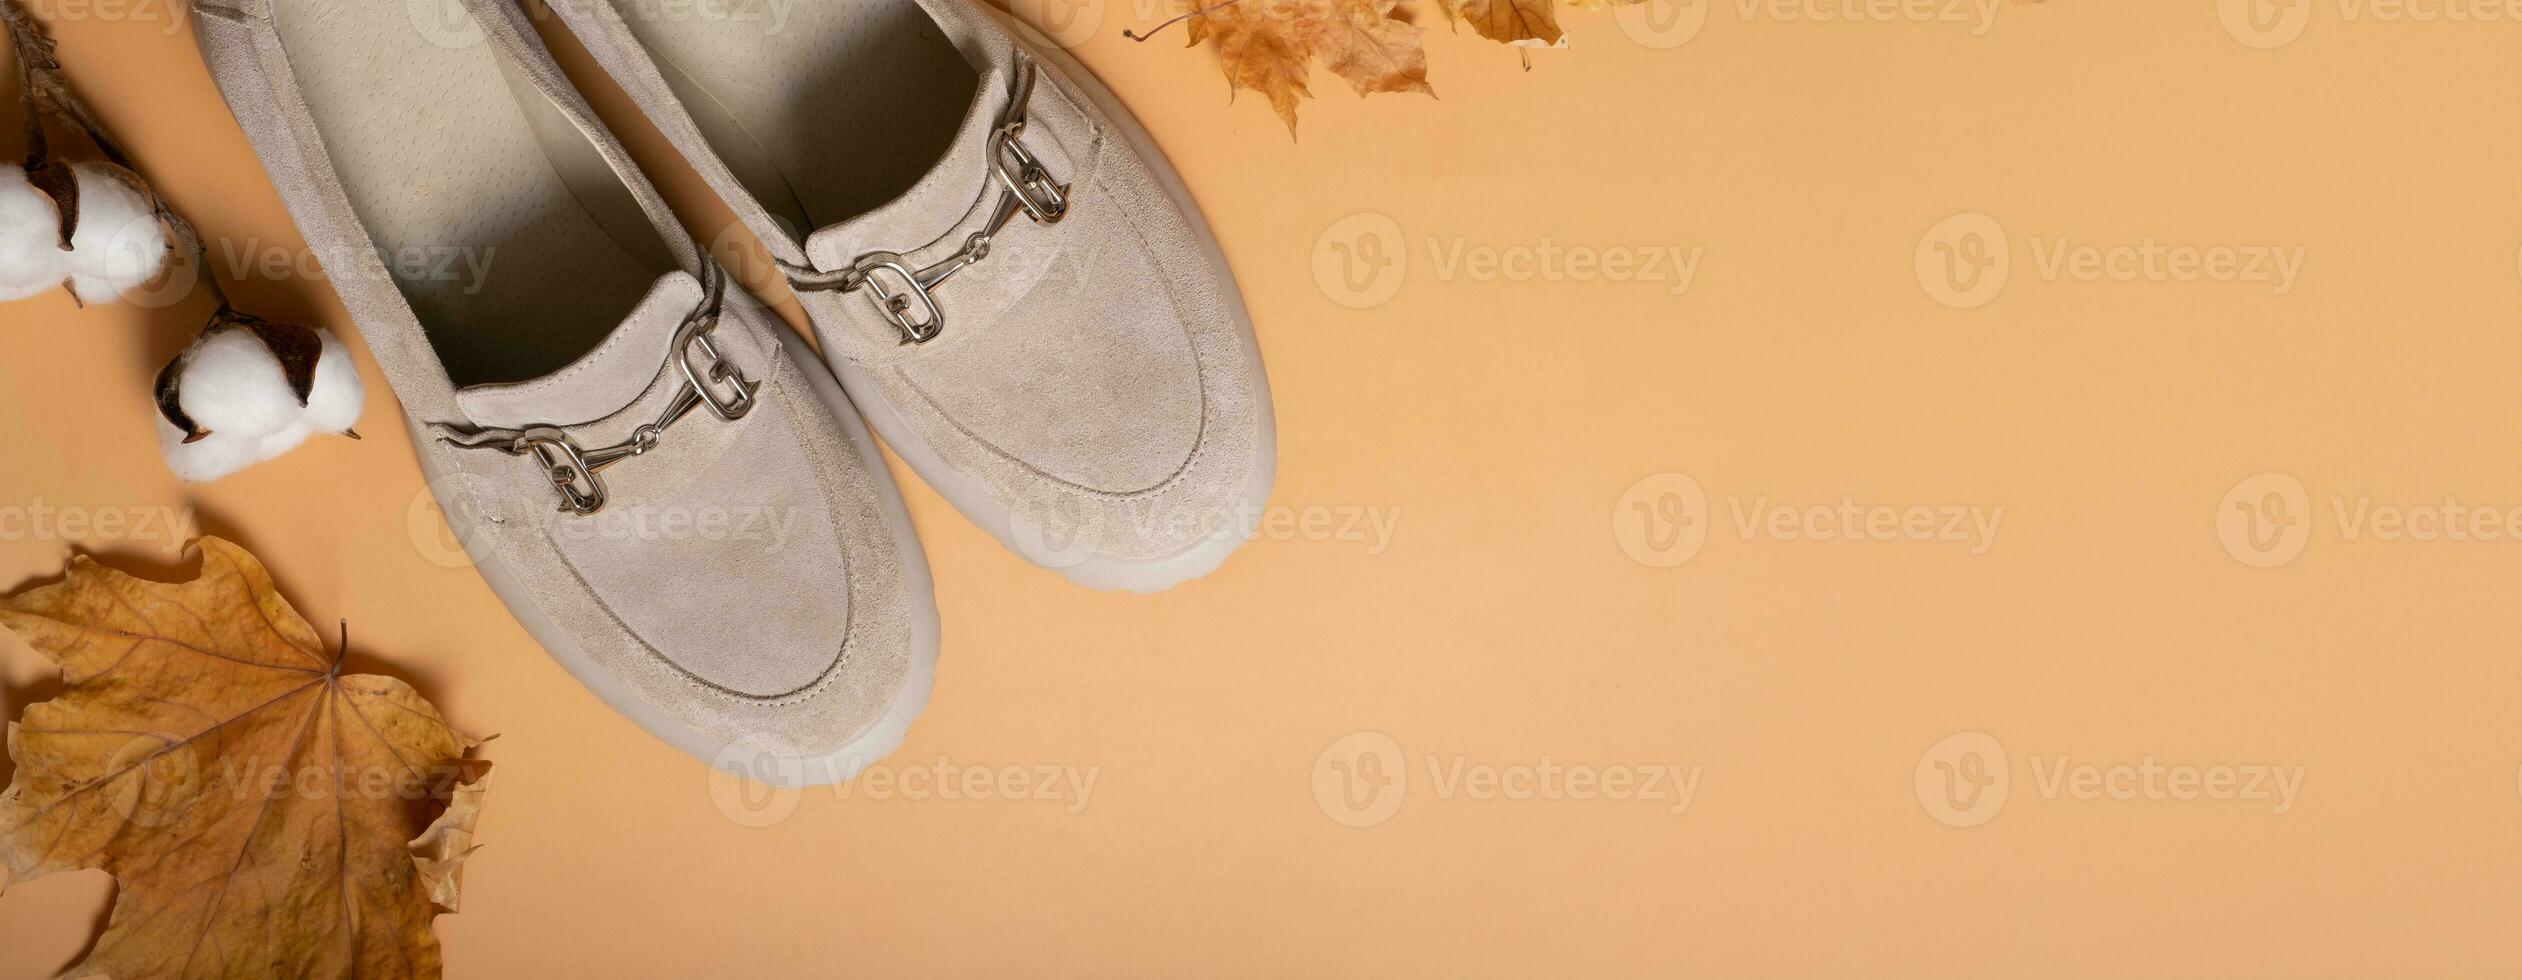 Suede shoes with autumn leaves and cotton candy on orange background top view. Casual fashion flat lay with copy space. photo